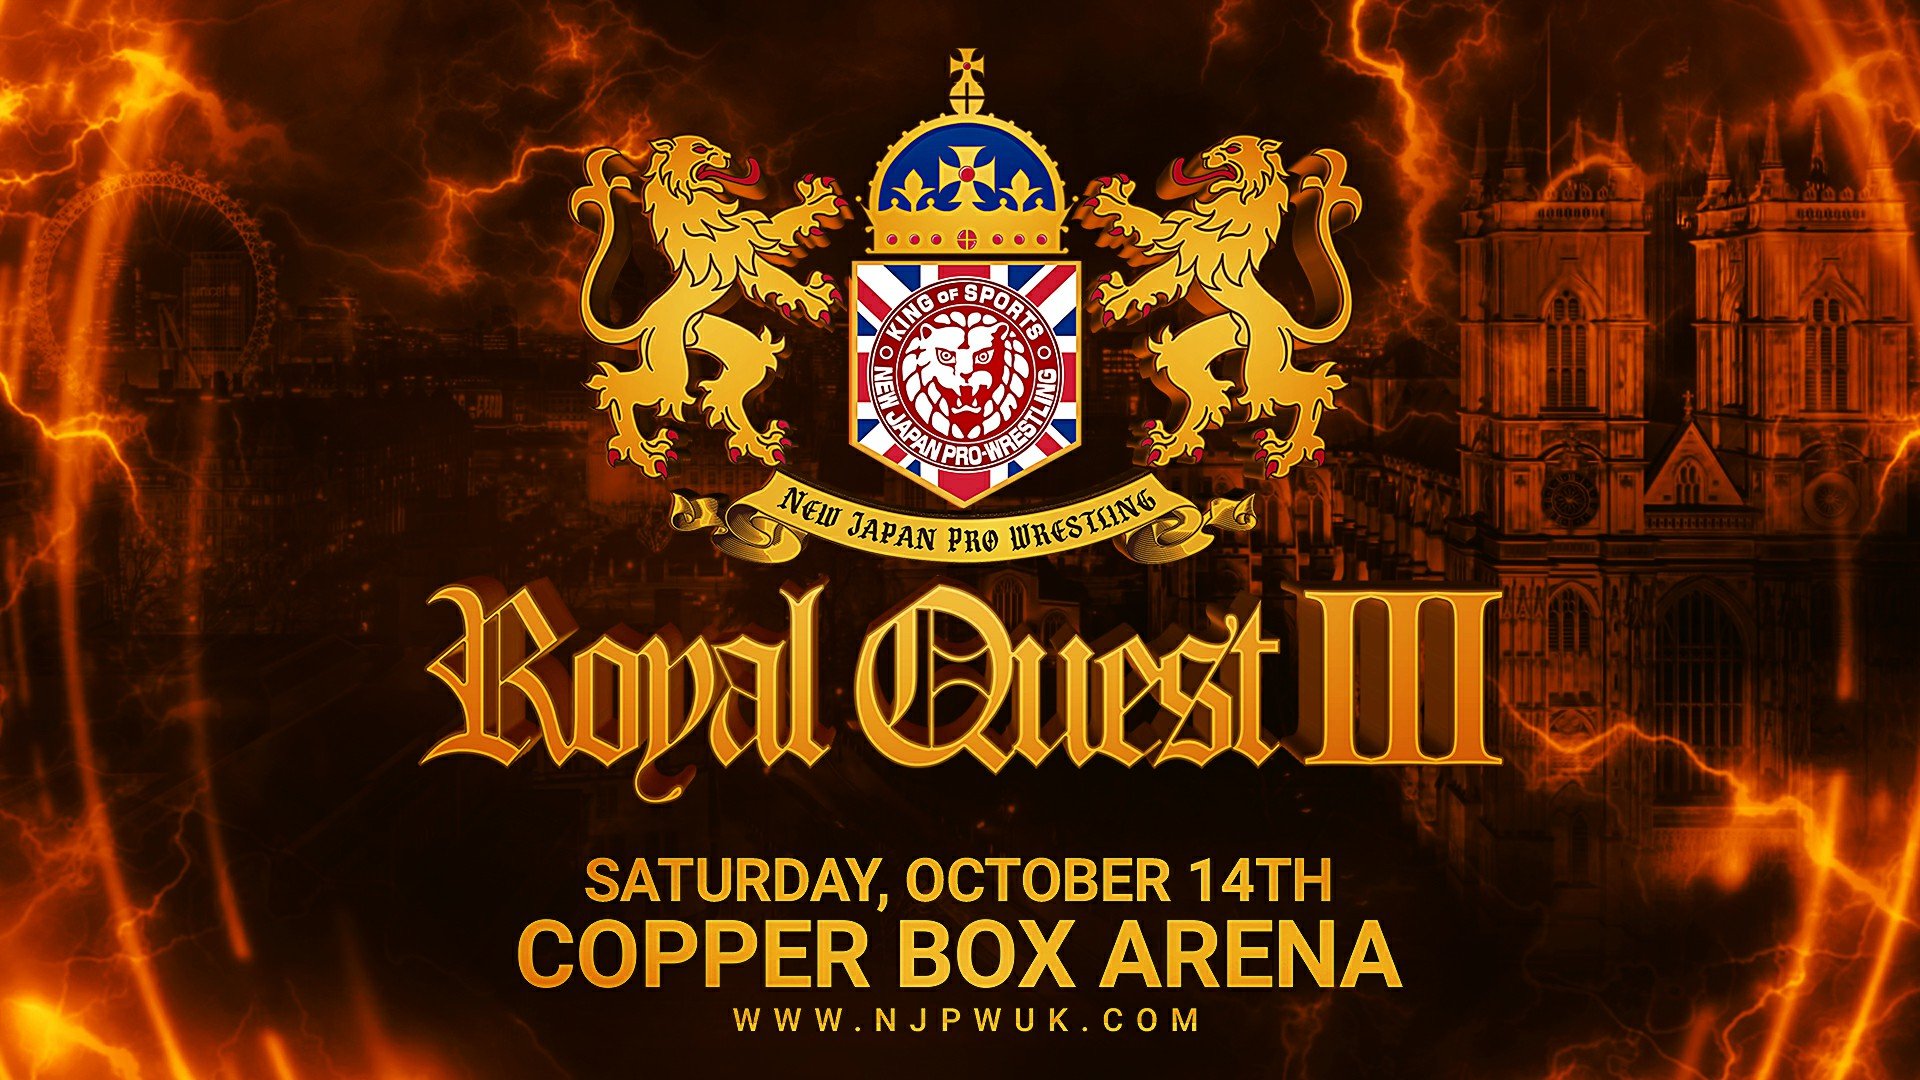 NJPW Collaborates with Revolution Pro Wrestling for Live Event: Royal Quest III